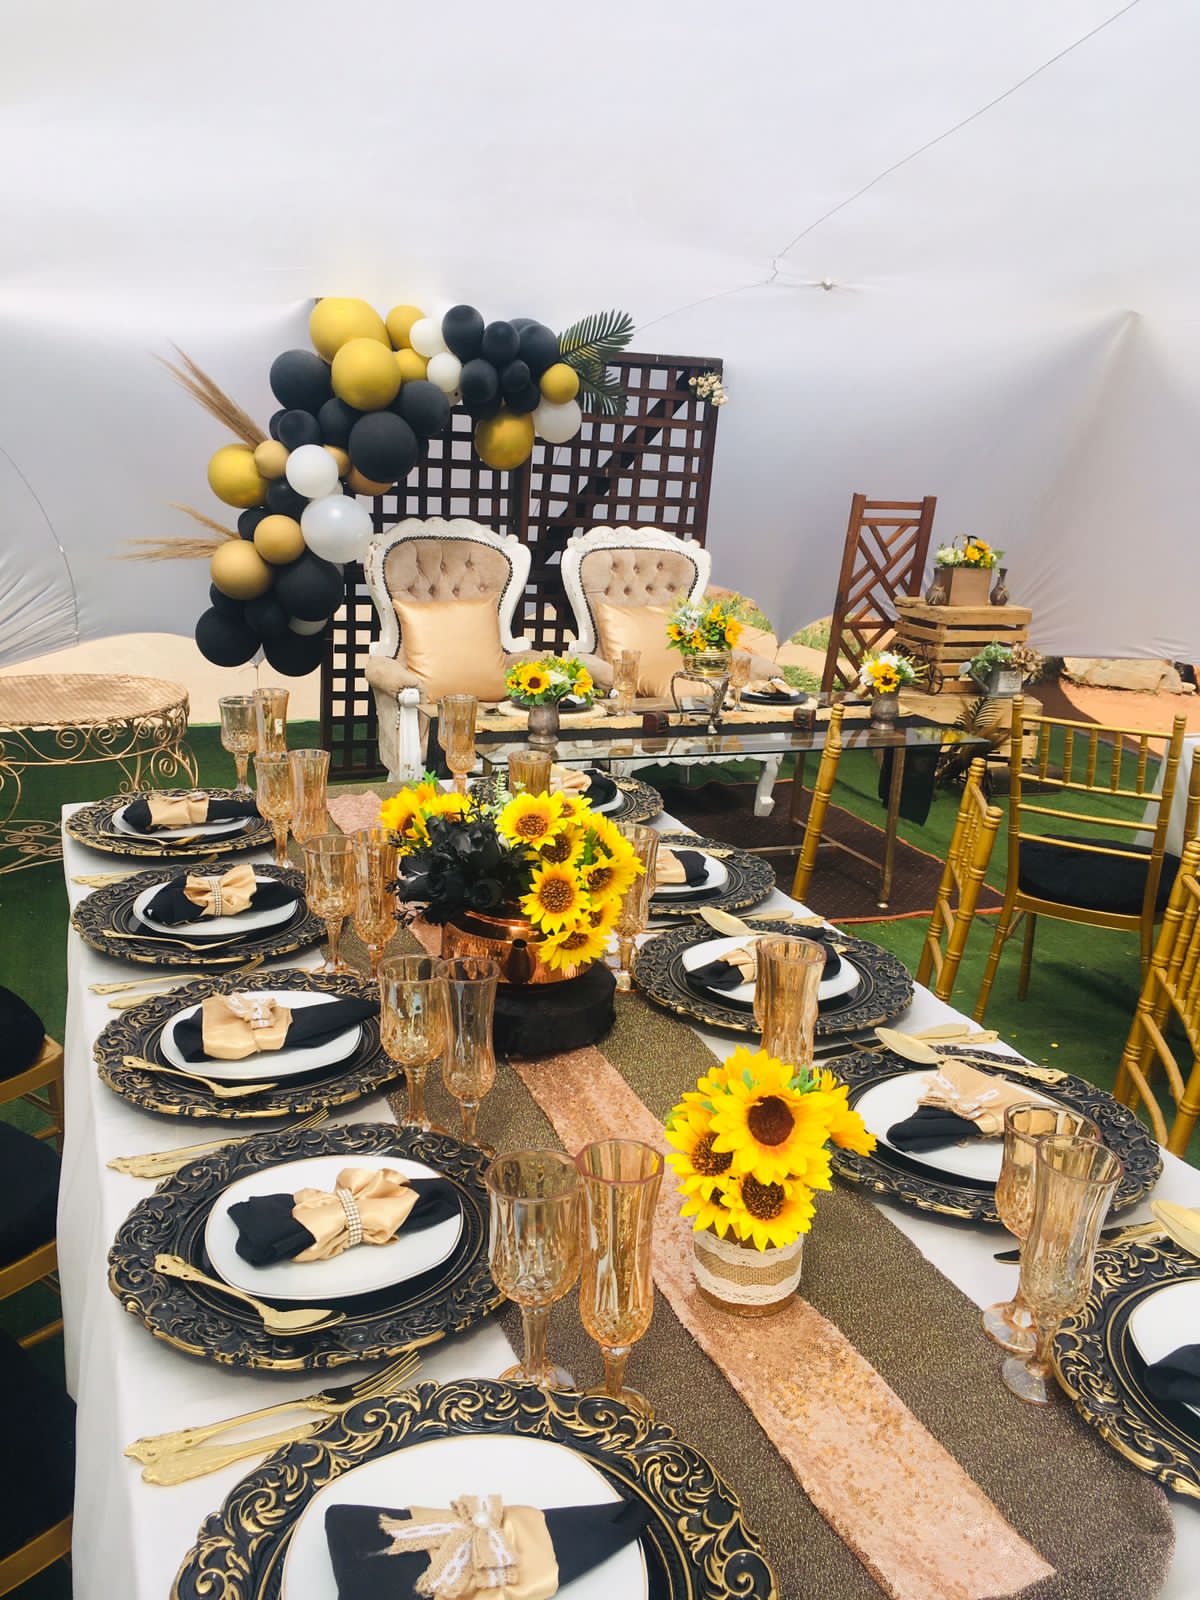 Dining table at event